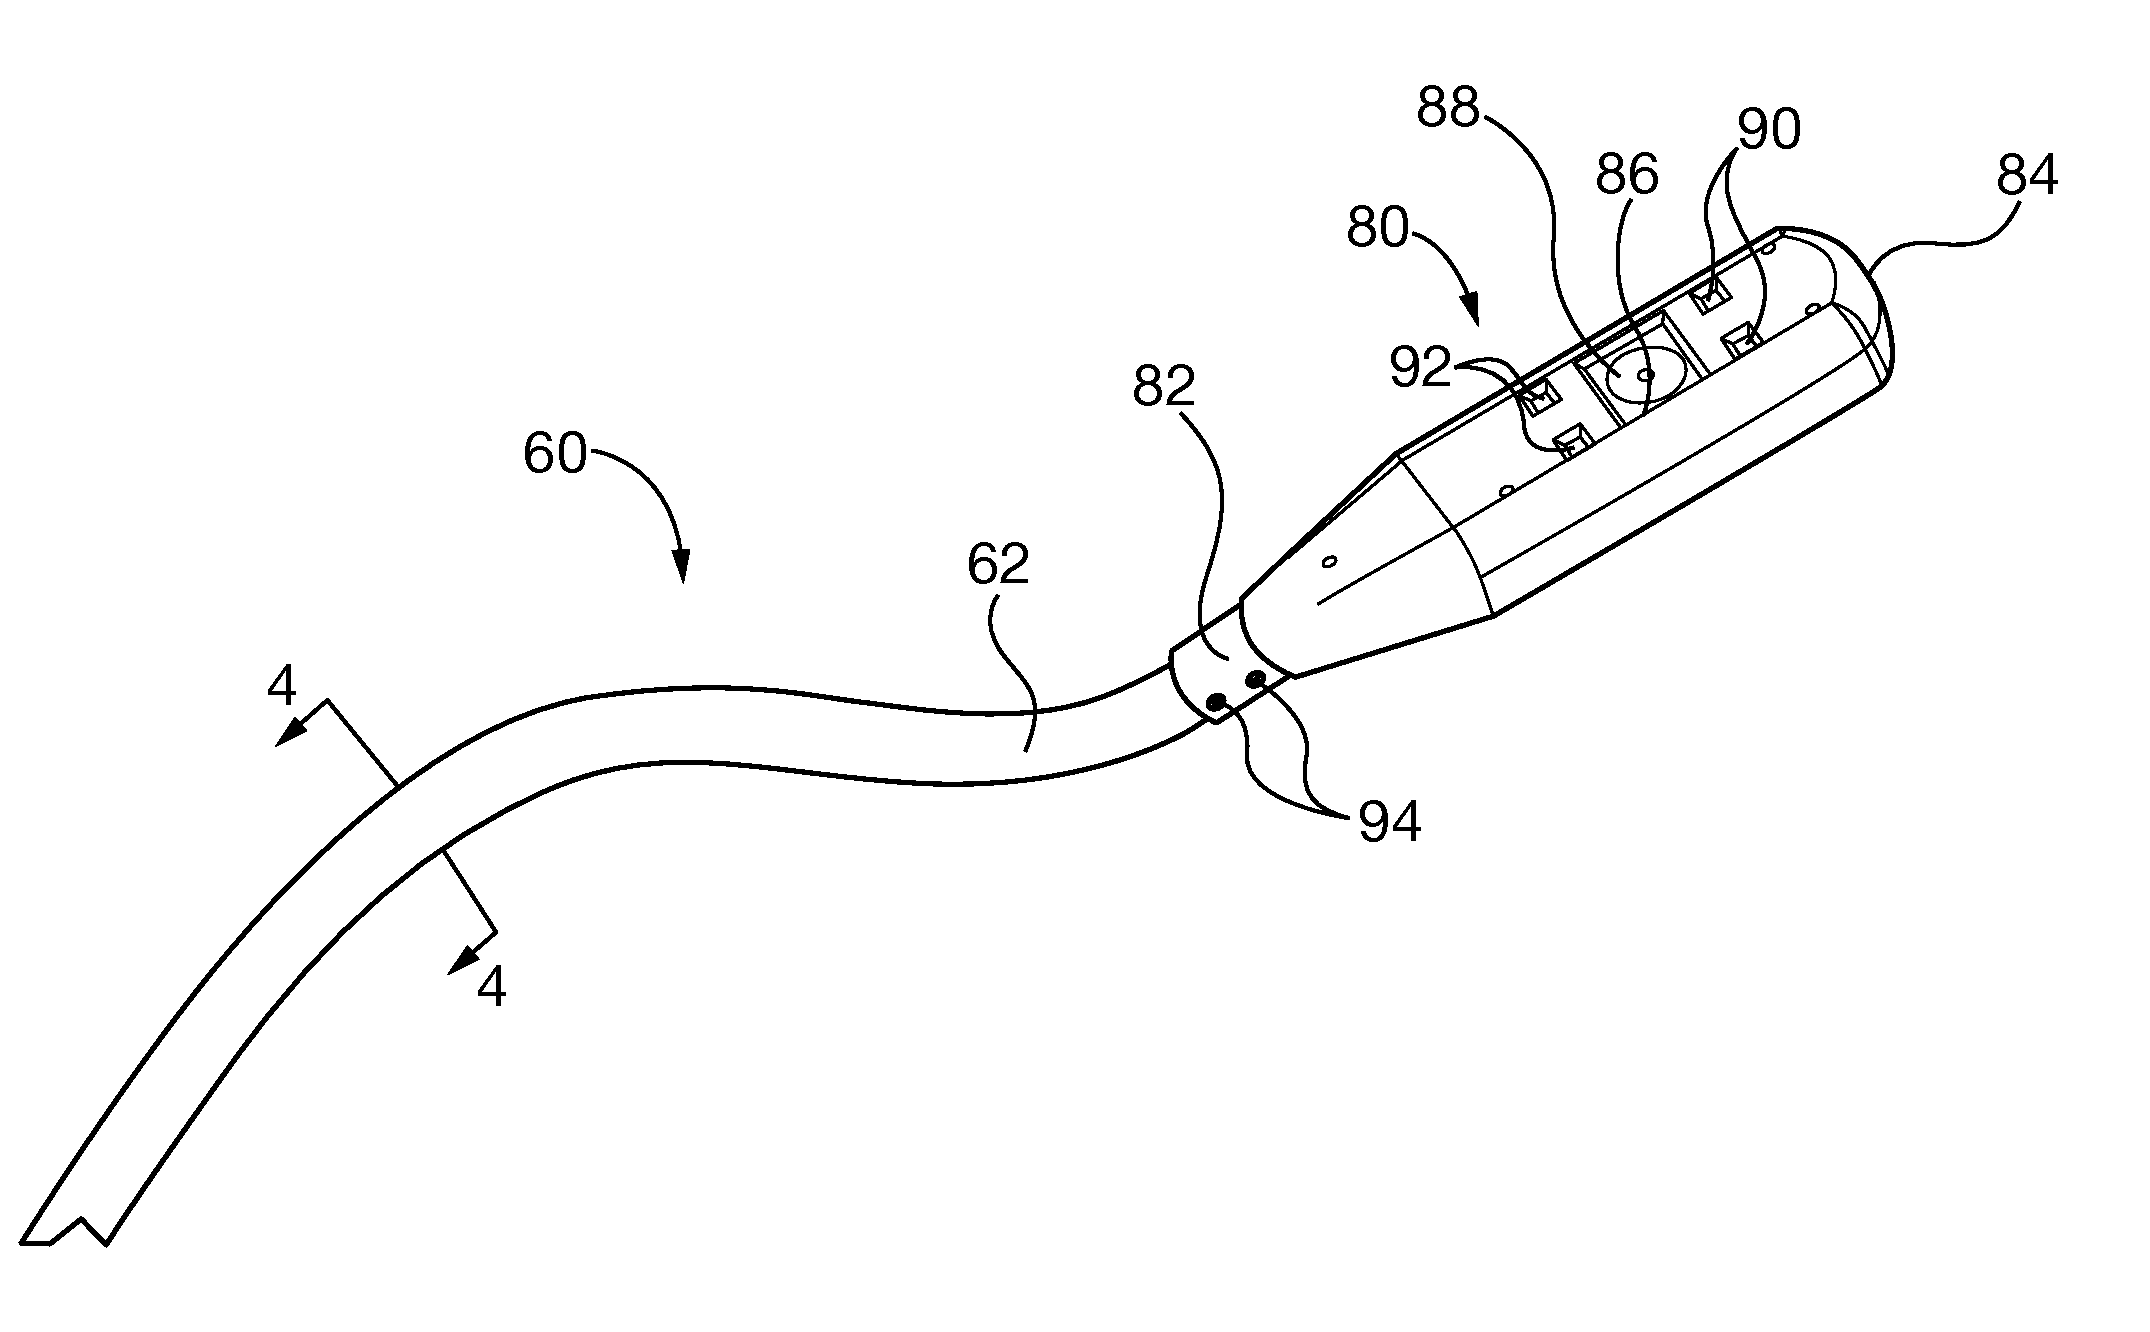 Optical inspection scope with deformable, self-supporting deployment tether